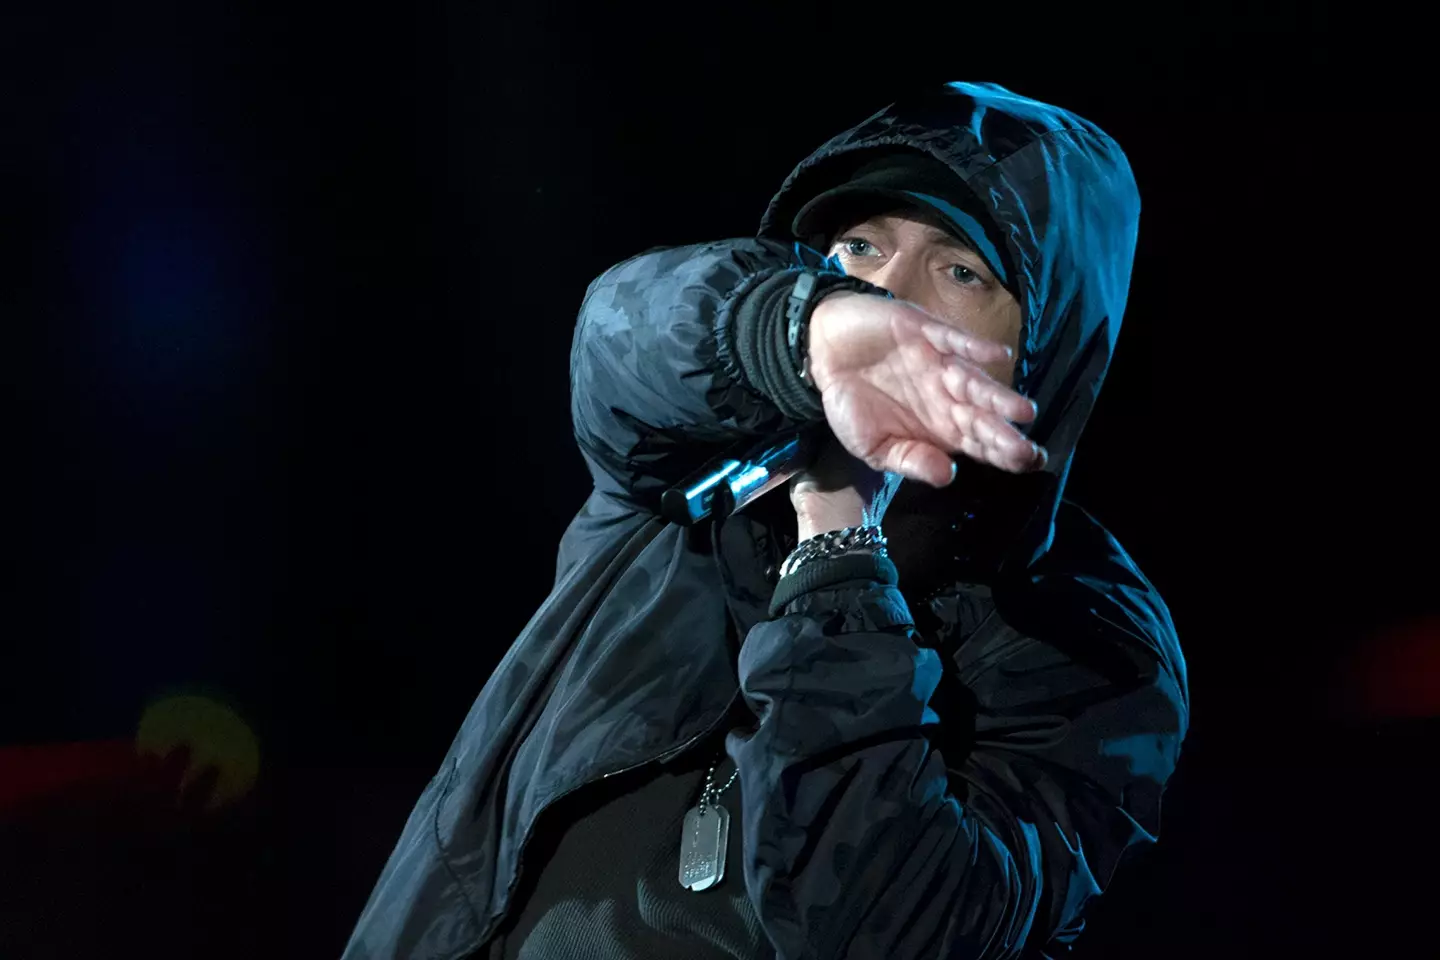 Eminem was the target of his diss track, though The Game has said it was 'nothing personal'.